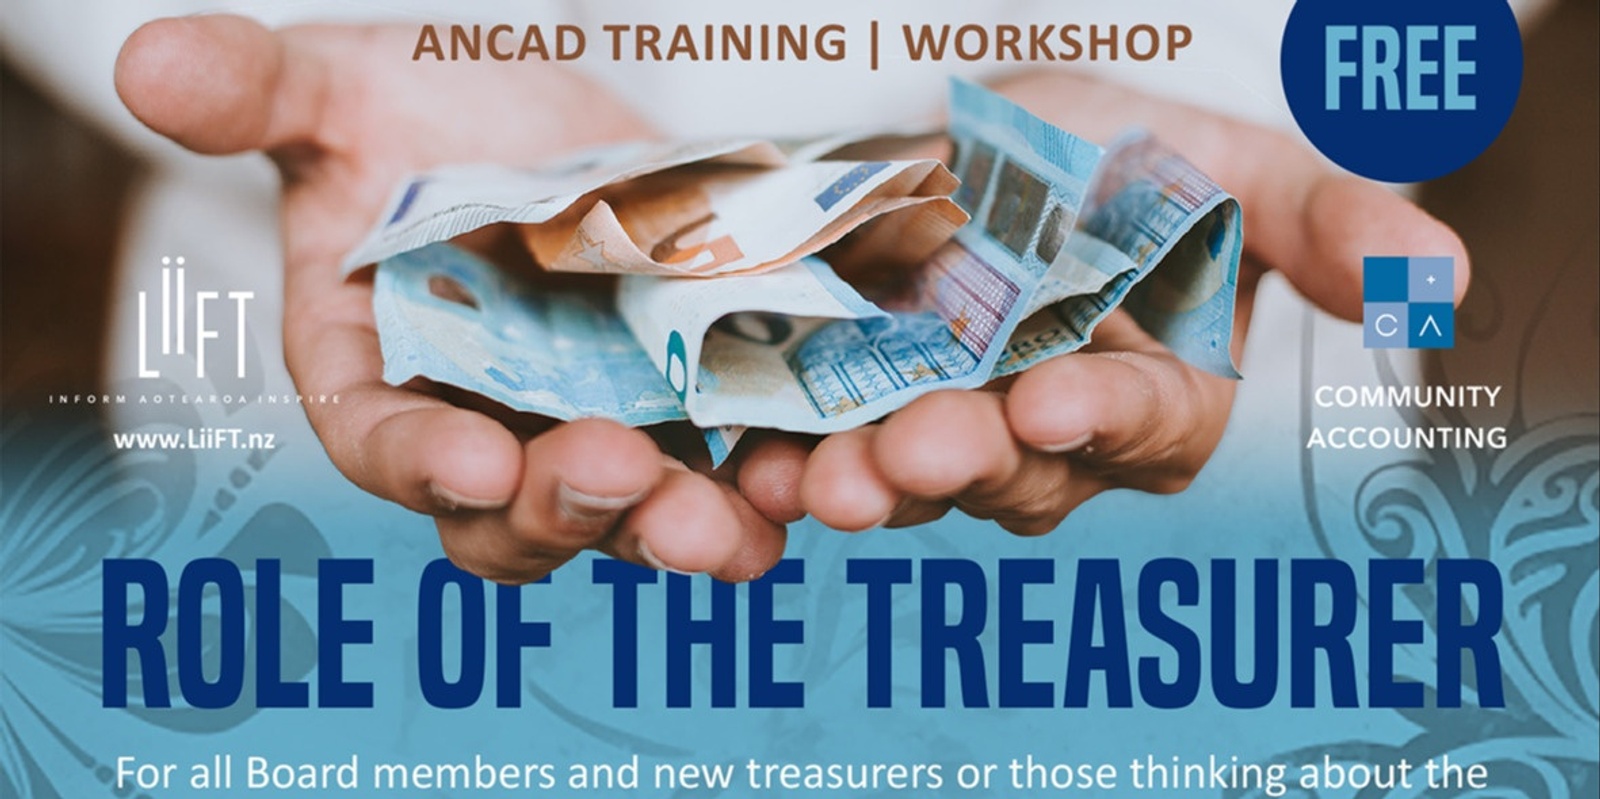 Banner image for FREE IN-PERSON WORKSHOP in Mt ROSKILL - ROLE OF THE TREASURER - for all Board members and new treasurers and those thinking about the role